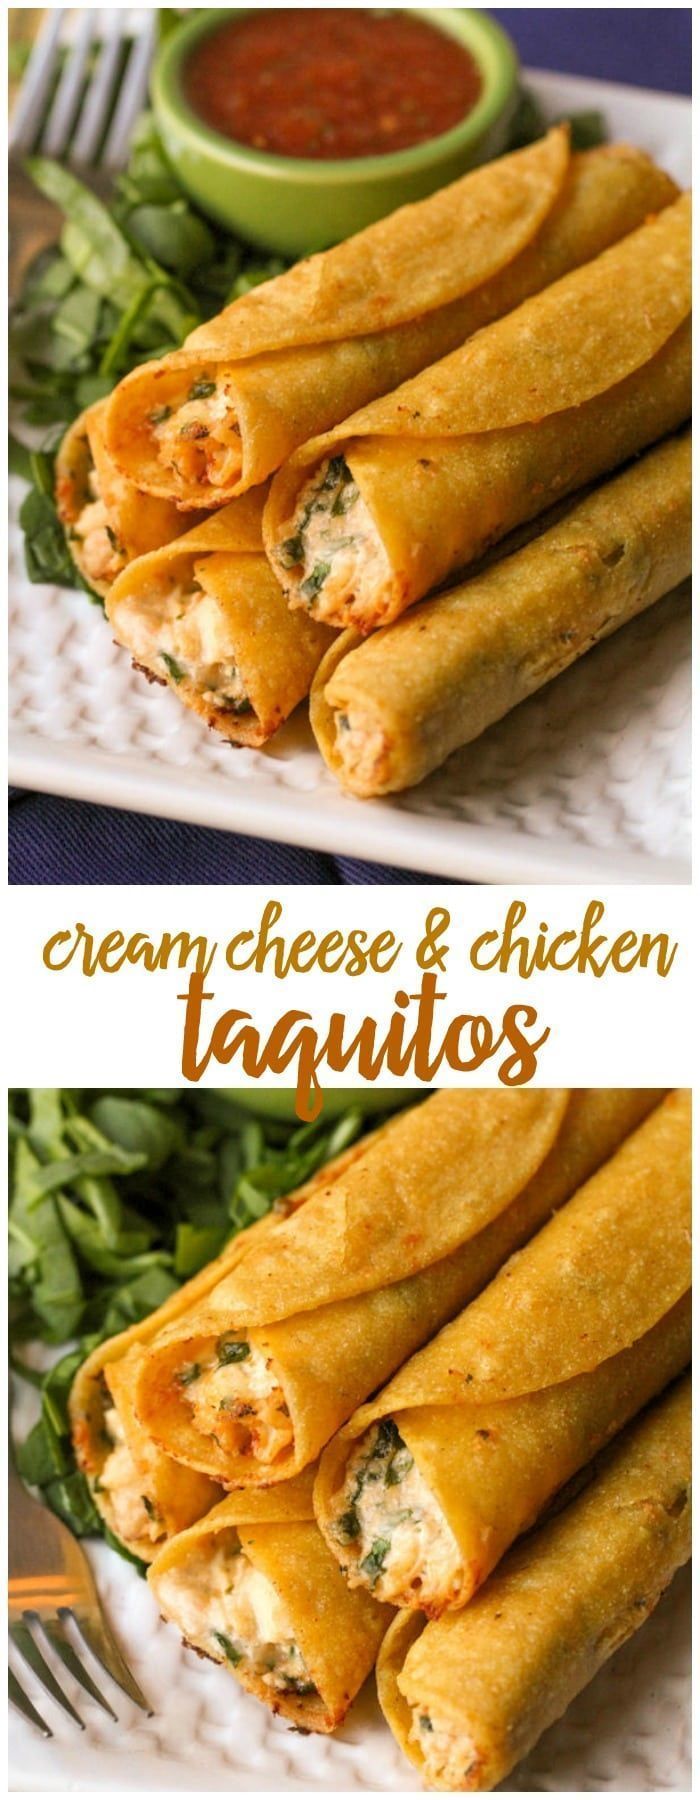 Cream Cheese and Chicken Taquitos | Recipe | Chicken taquitos, Taquitos recipe, Great dinner recipes -   17 dinner recipes healthy for two ideas